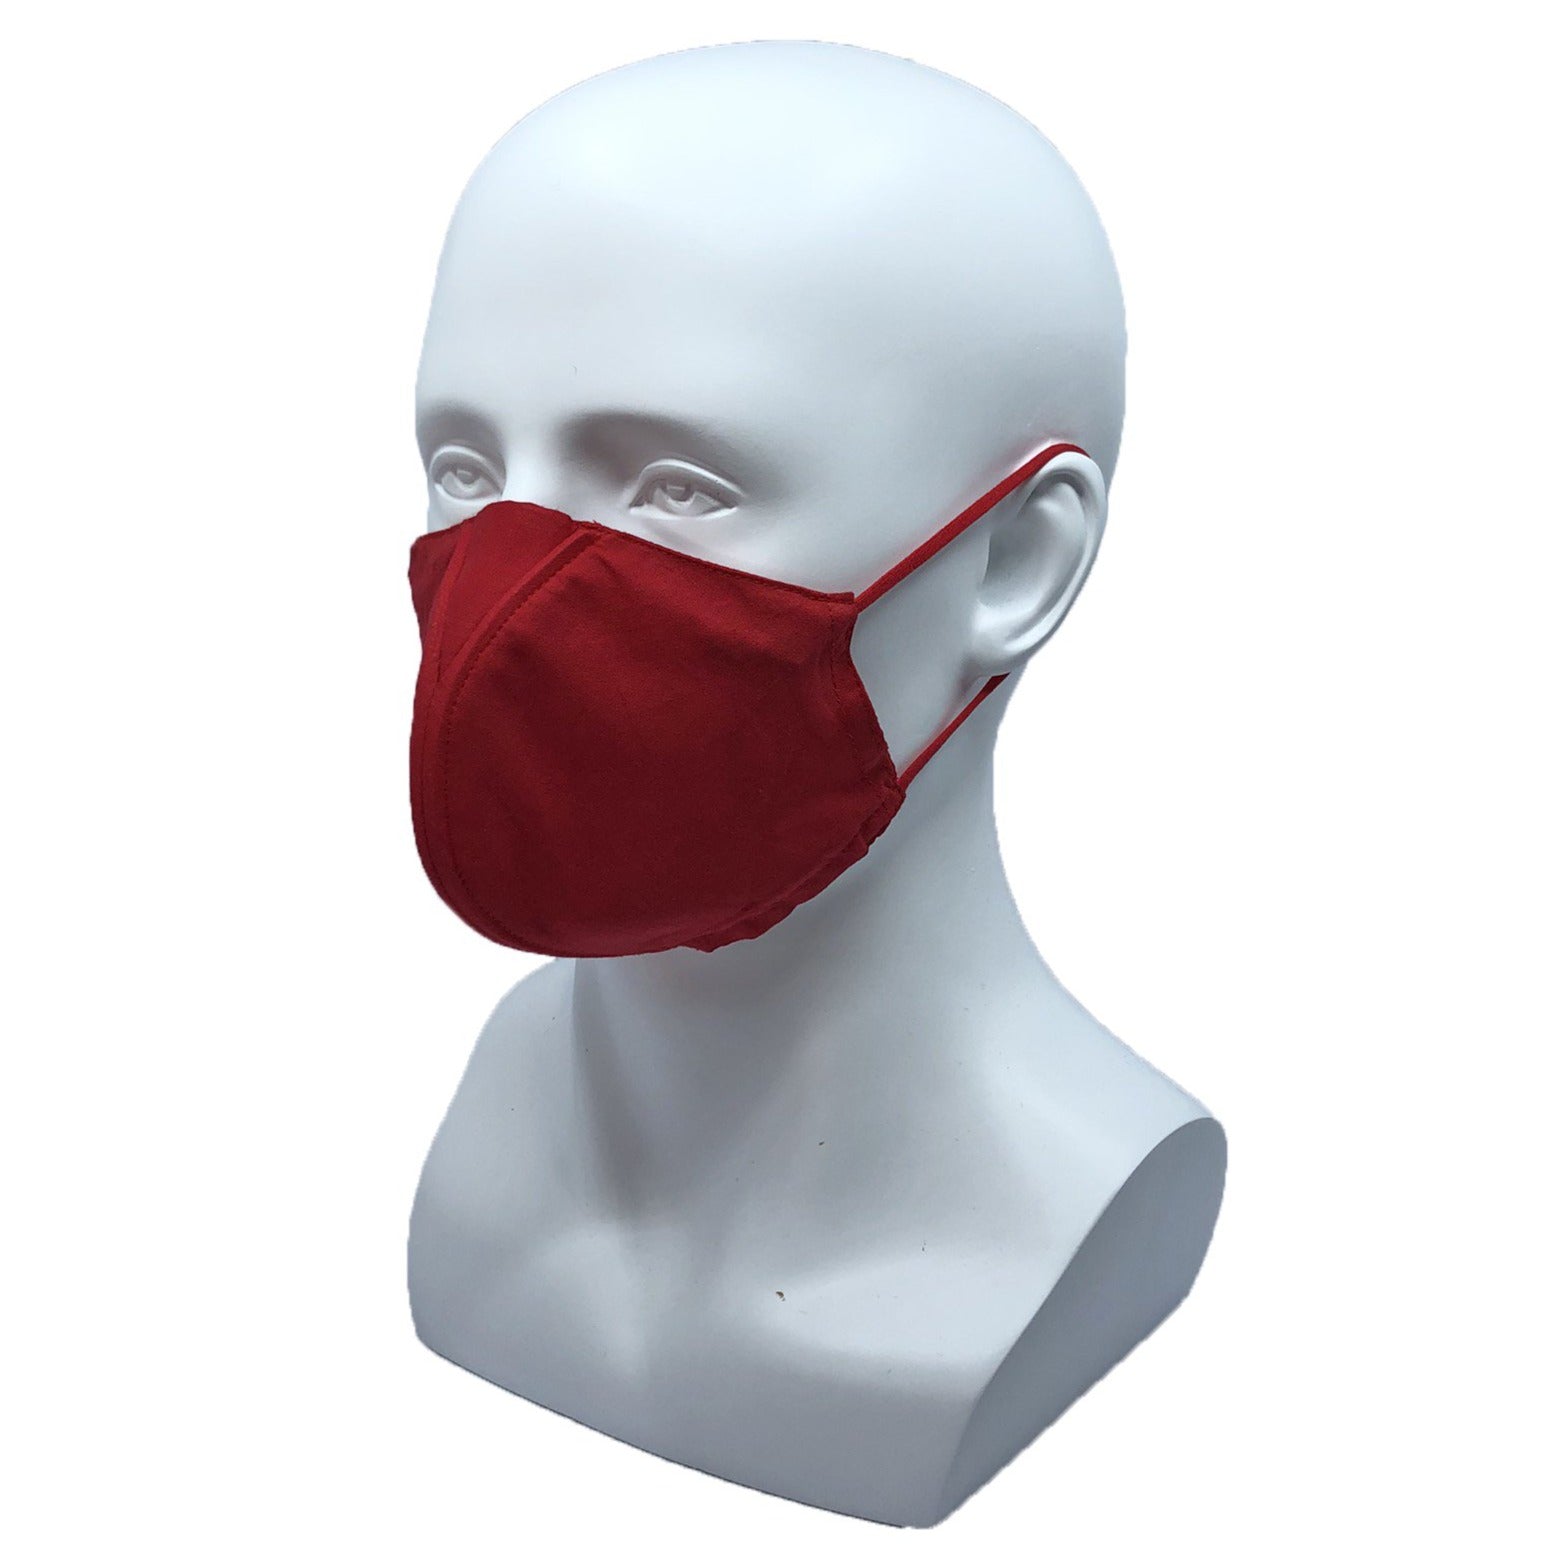 Solid Why-Y Fabric Mask, Red